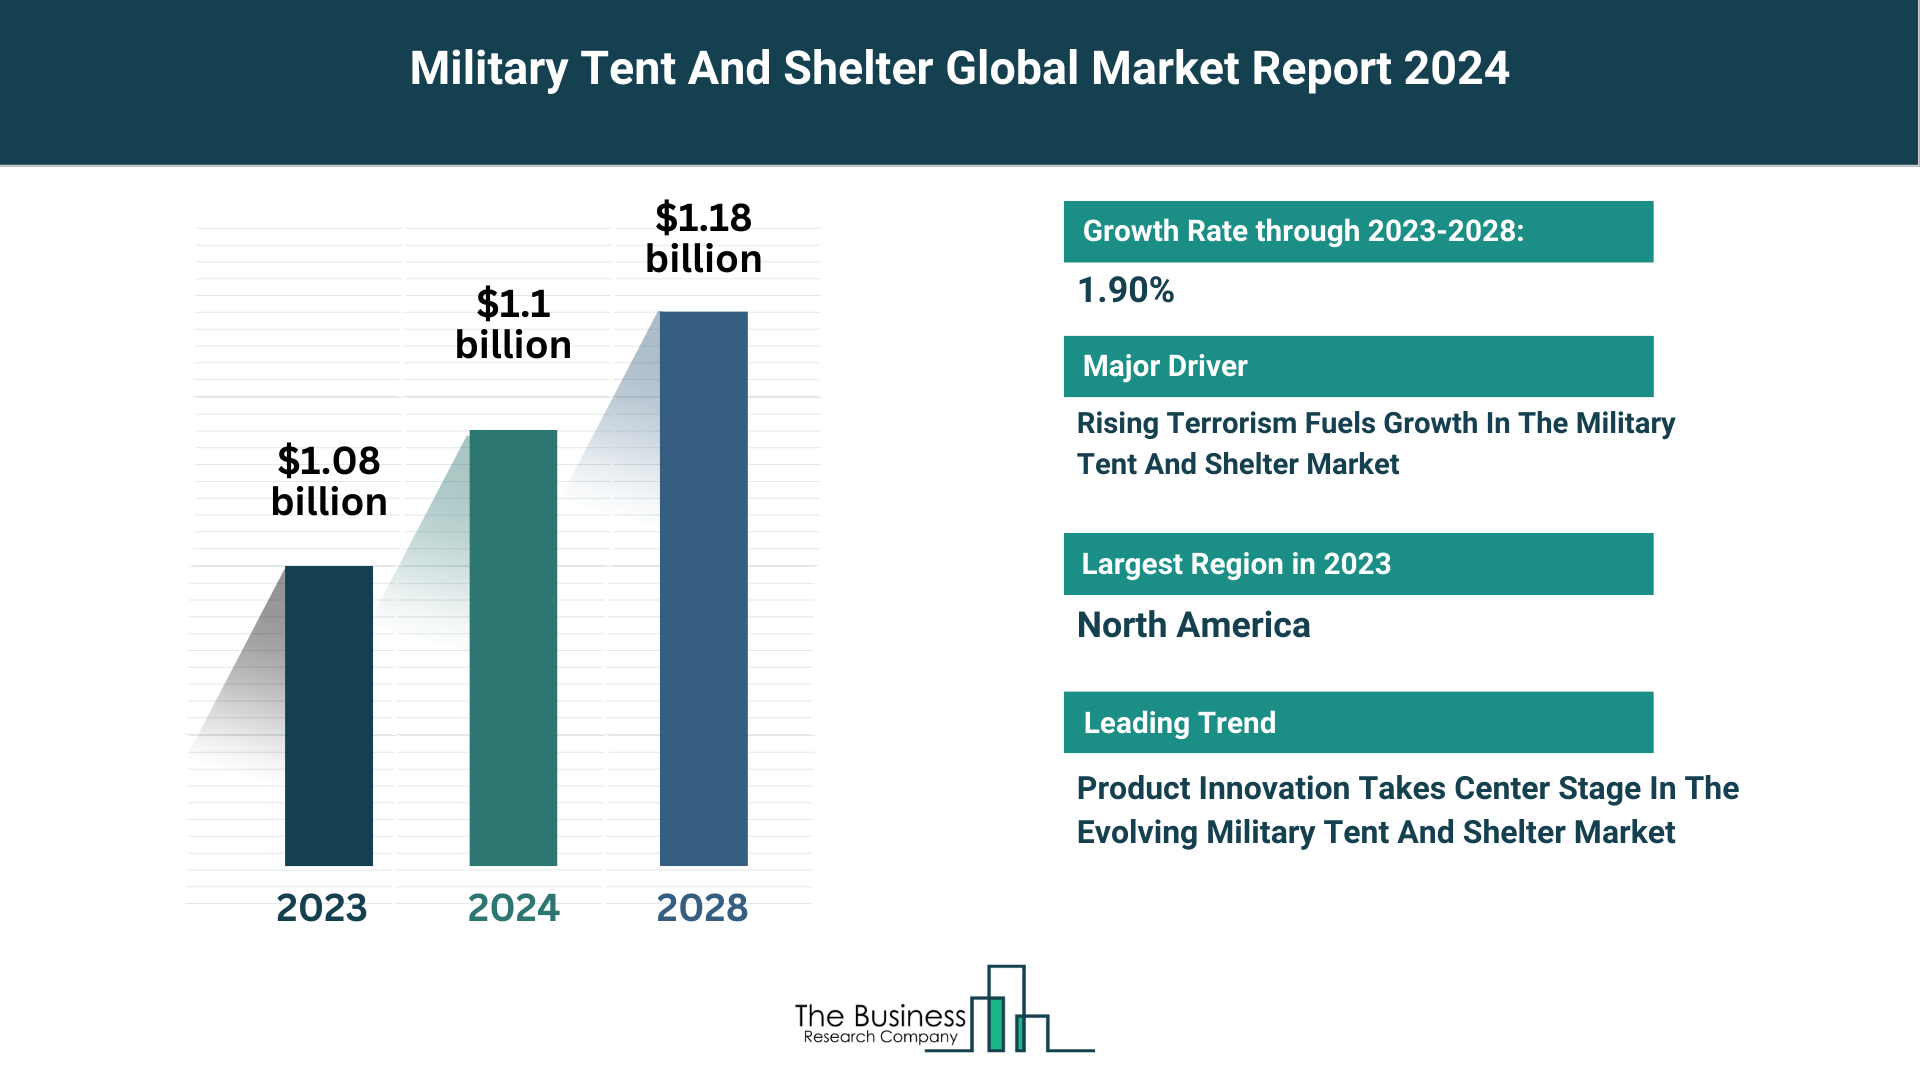 Global Military Tent And Shelter Market